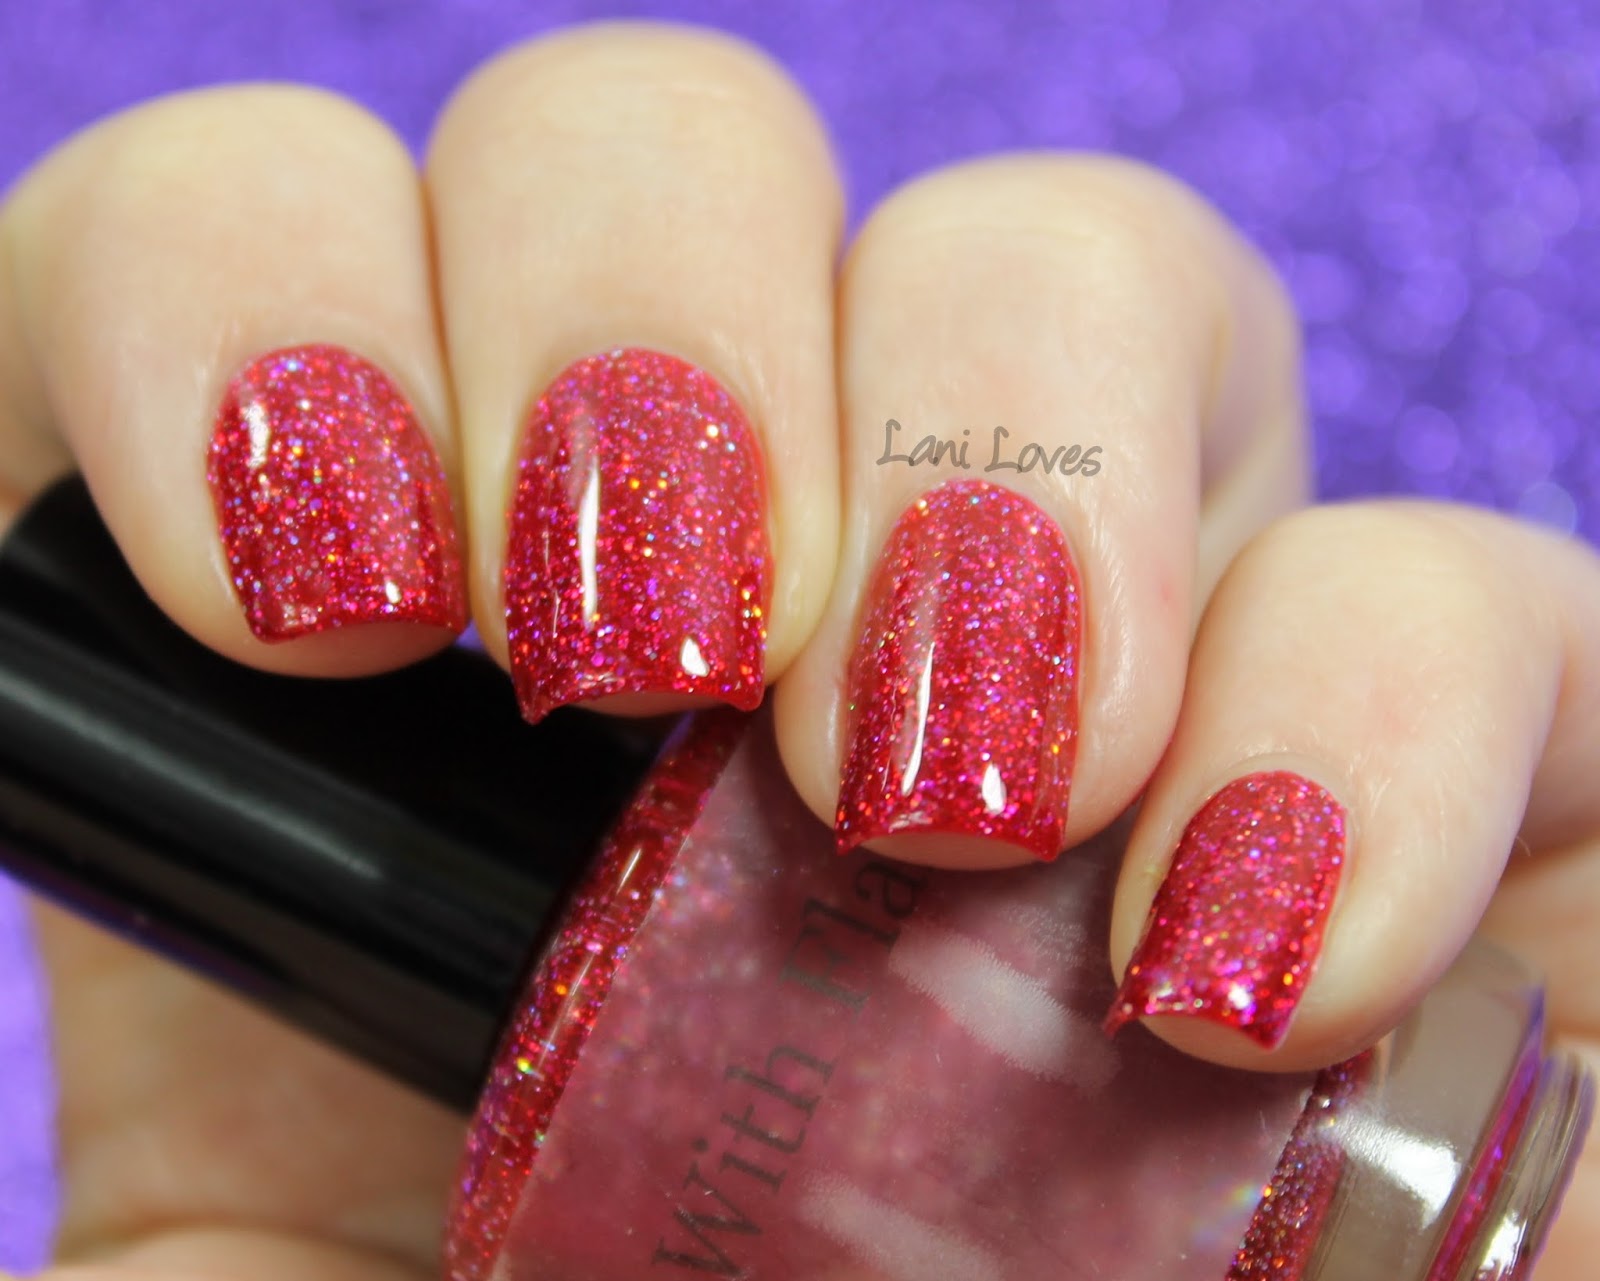 L'Oreal Lifetime Love + Pahlish Pianos Filled With Flames swatch